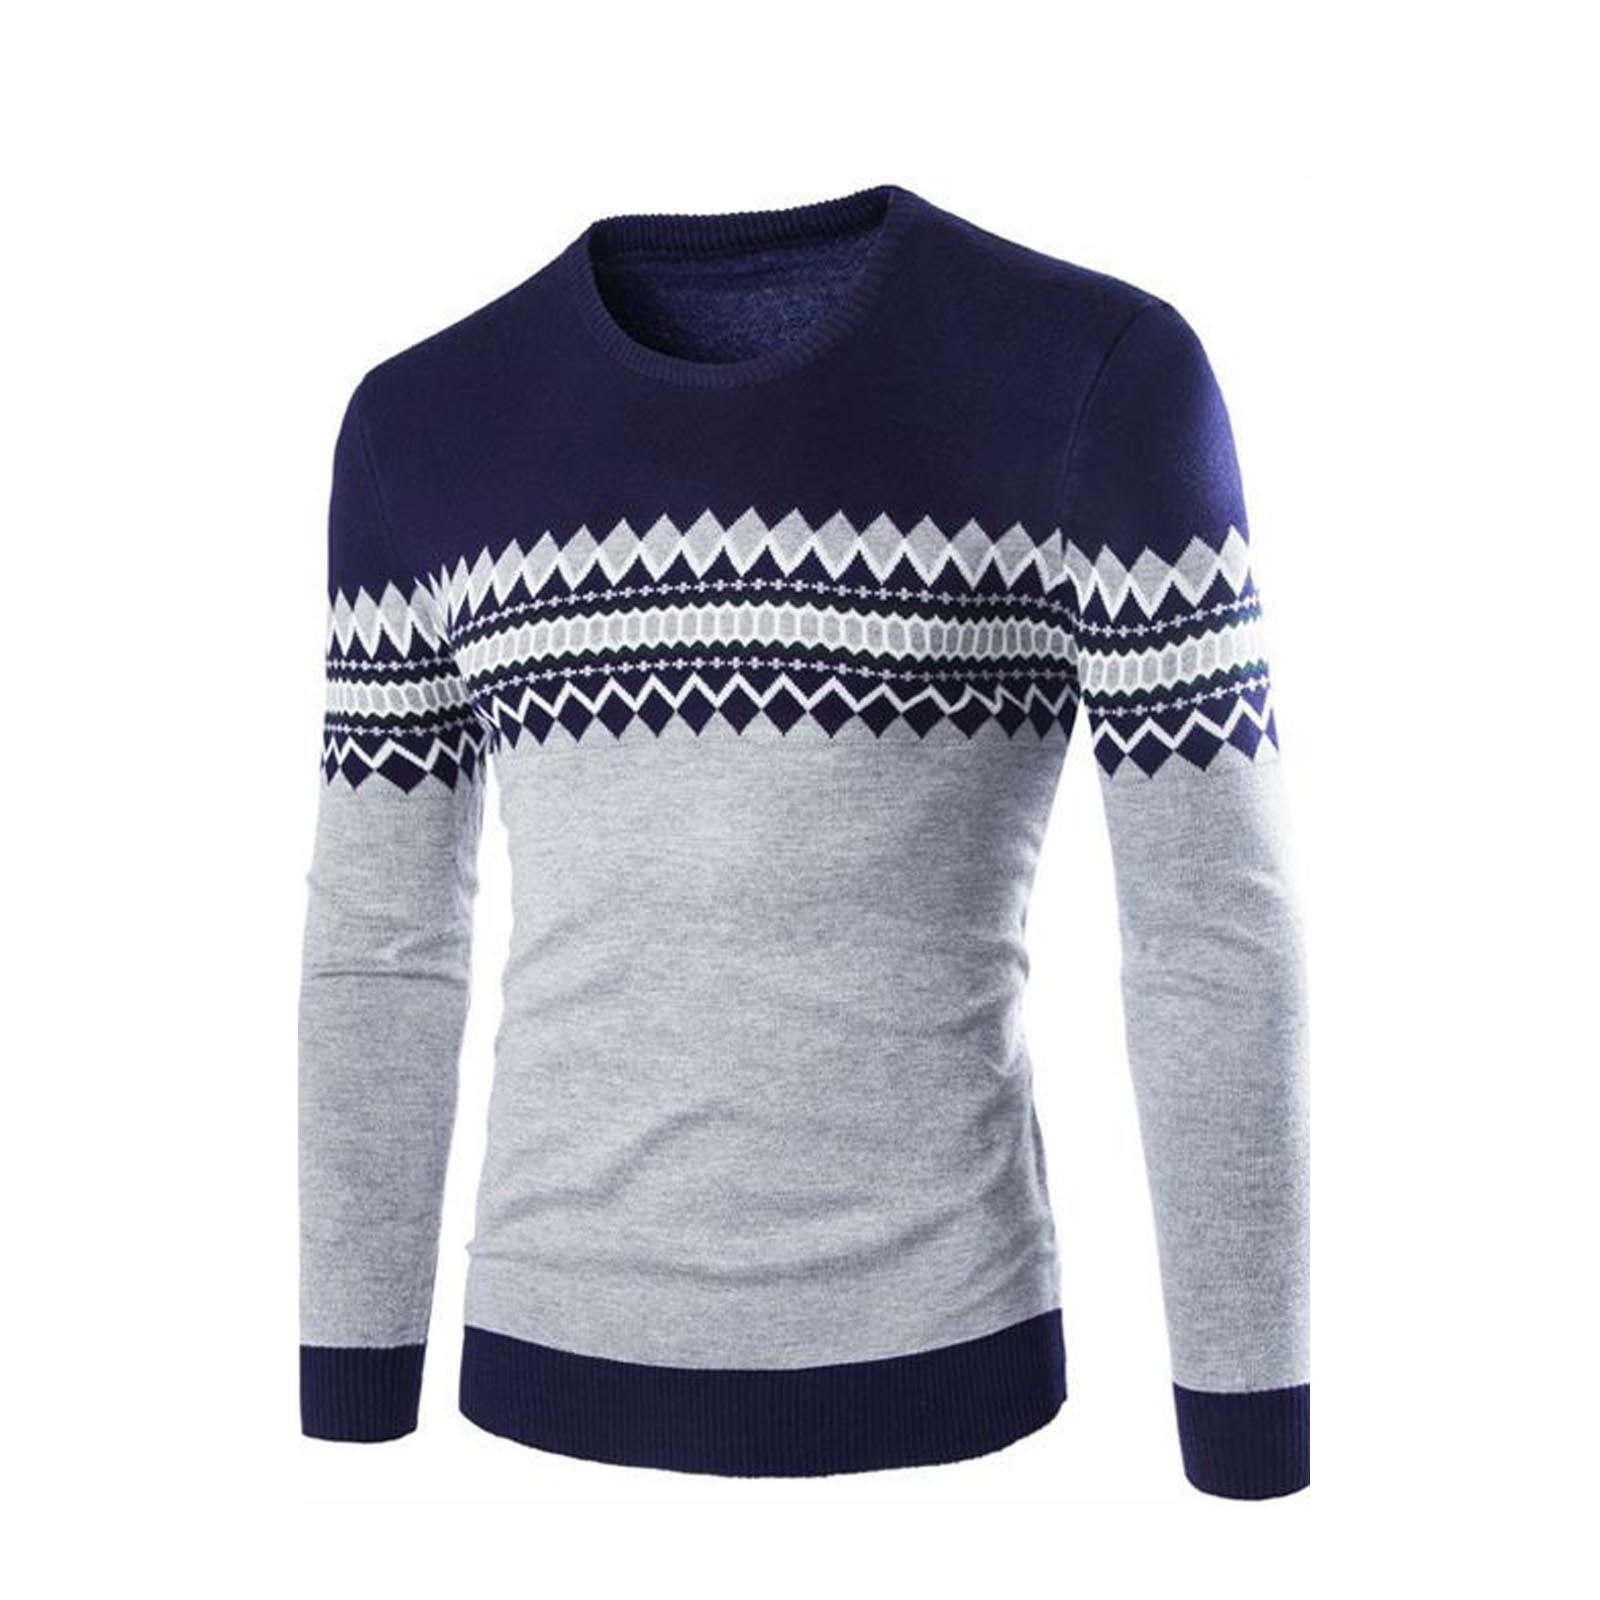 ZCFZJW Fair Isle Sweater Men Casual Round Neck Pullover Sweaters